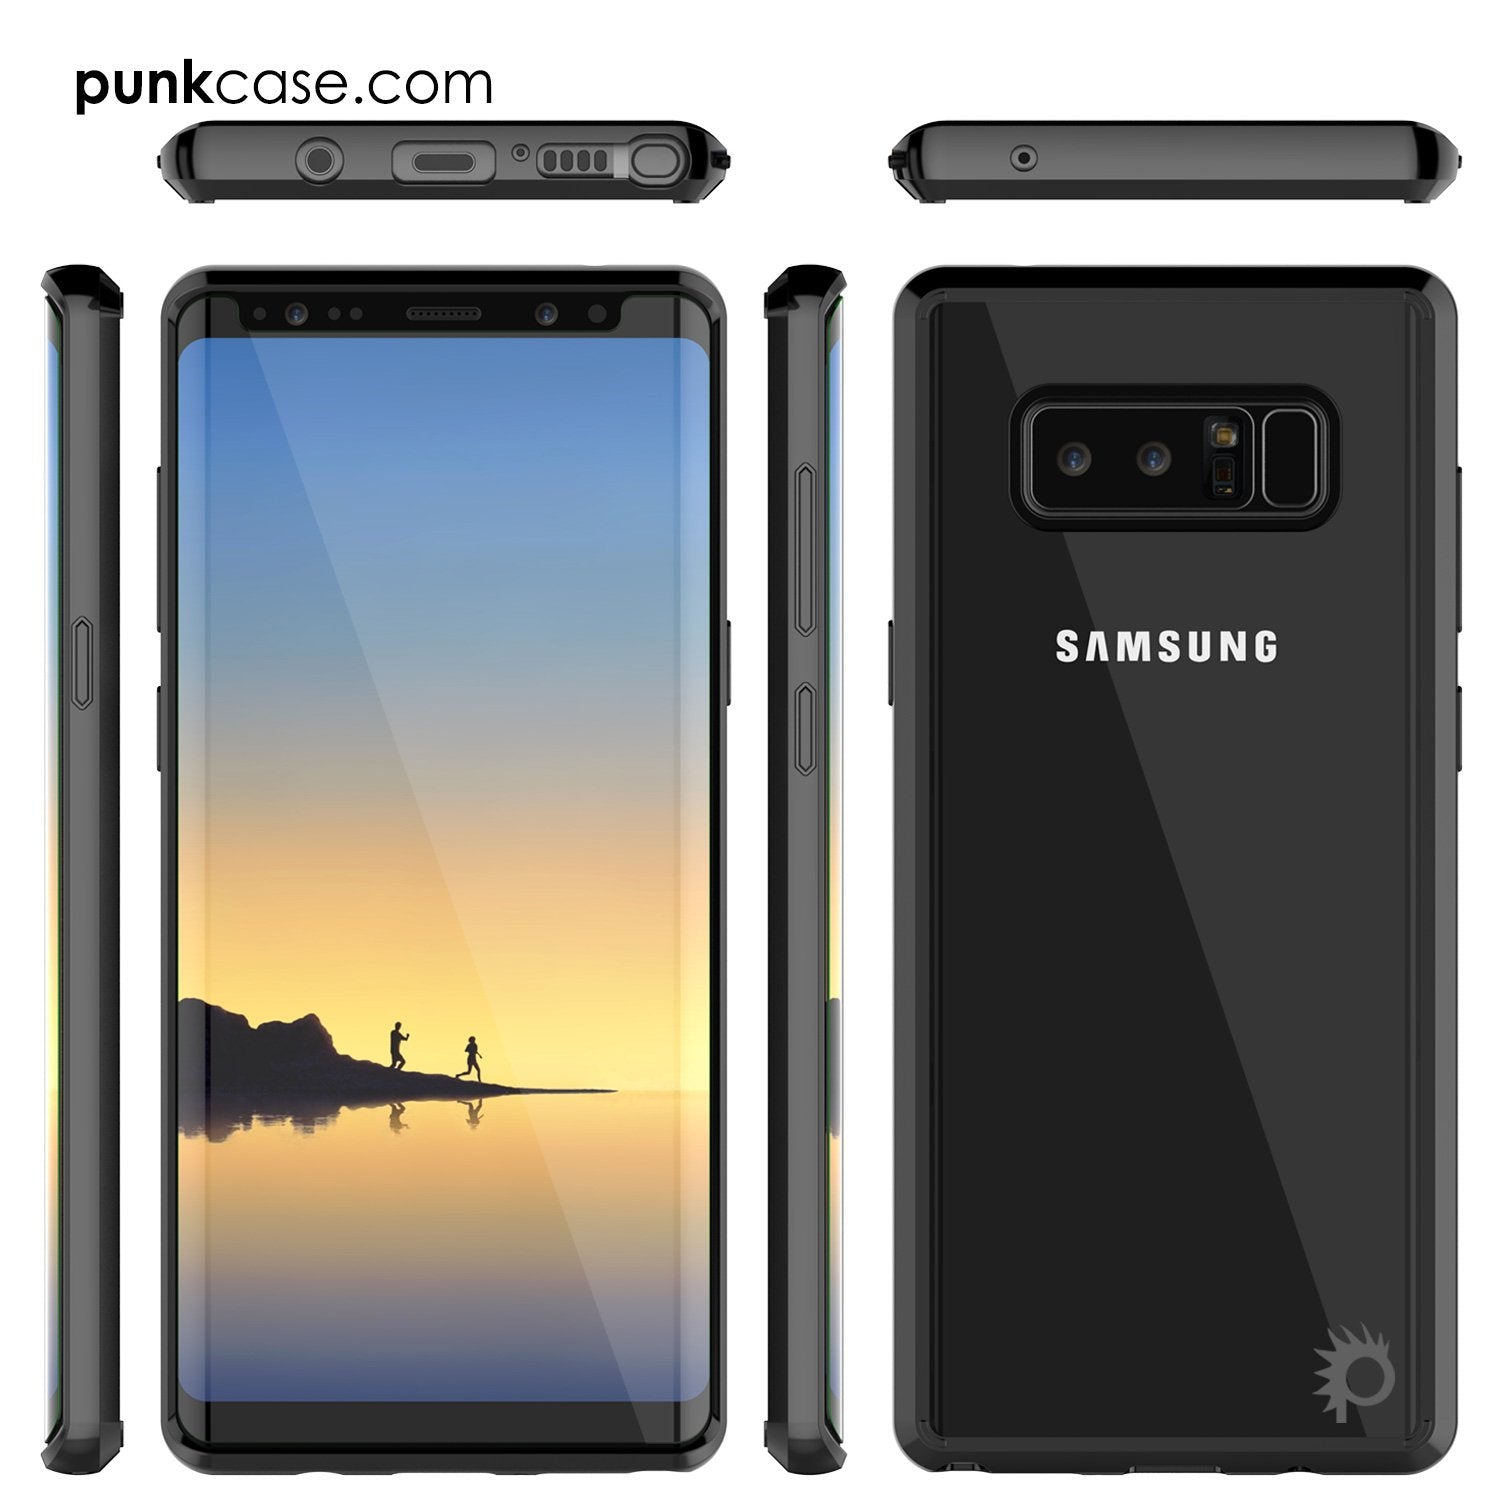 Galaxy Note 8 Punkcase, LUCID 2.0 Series Armor Cover, [Black]